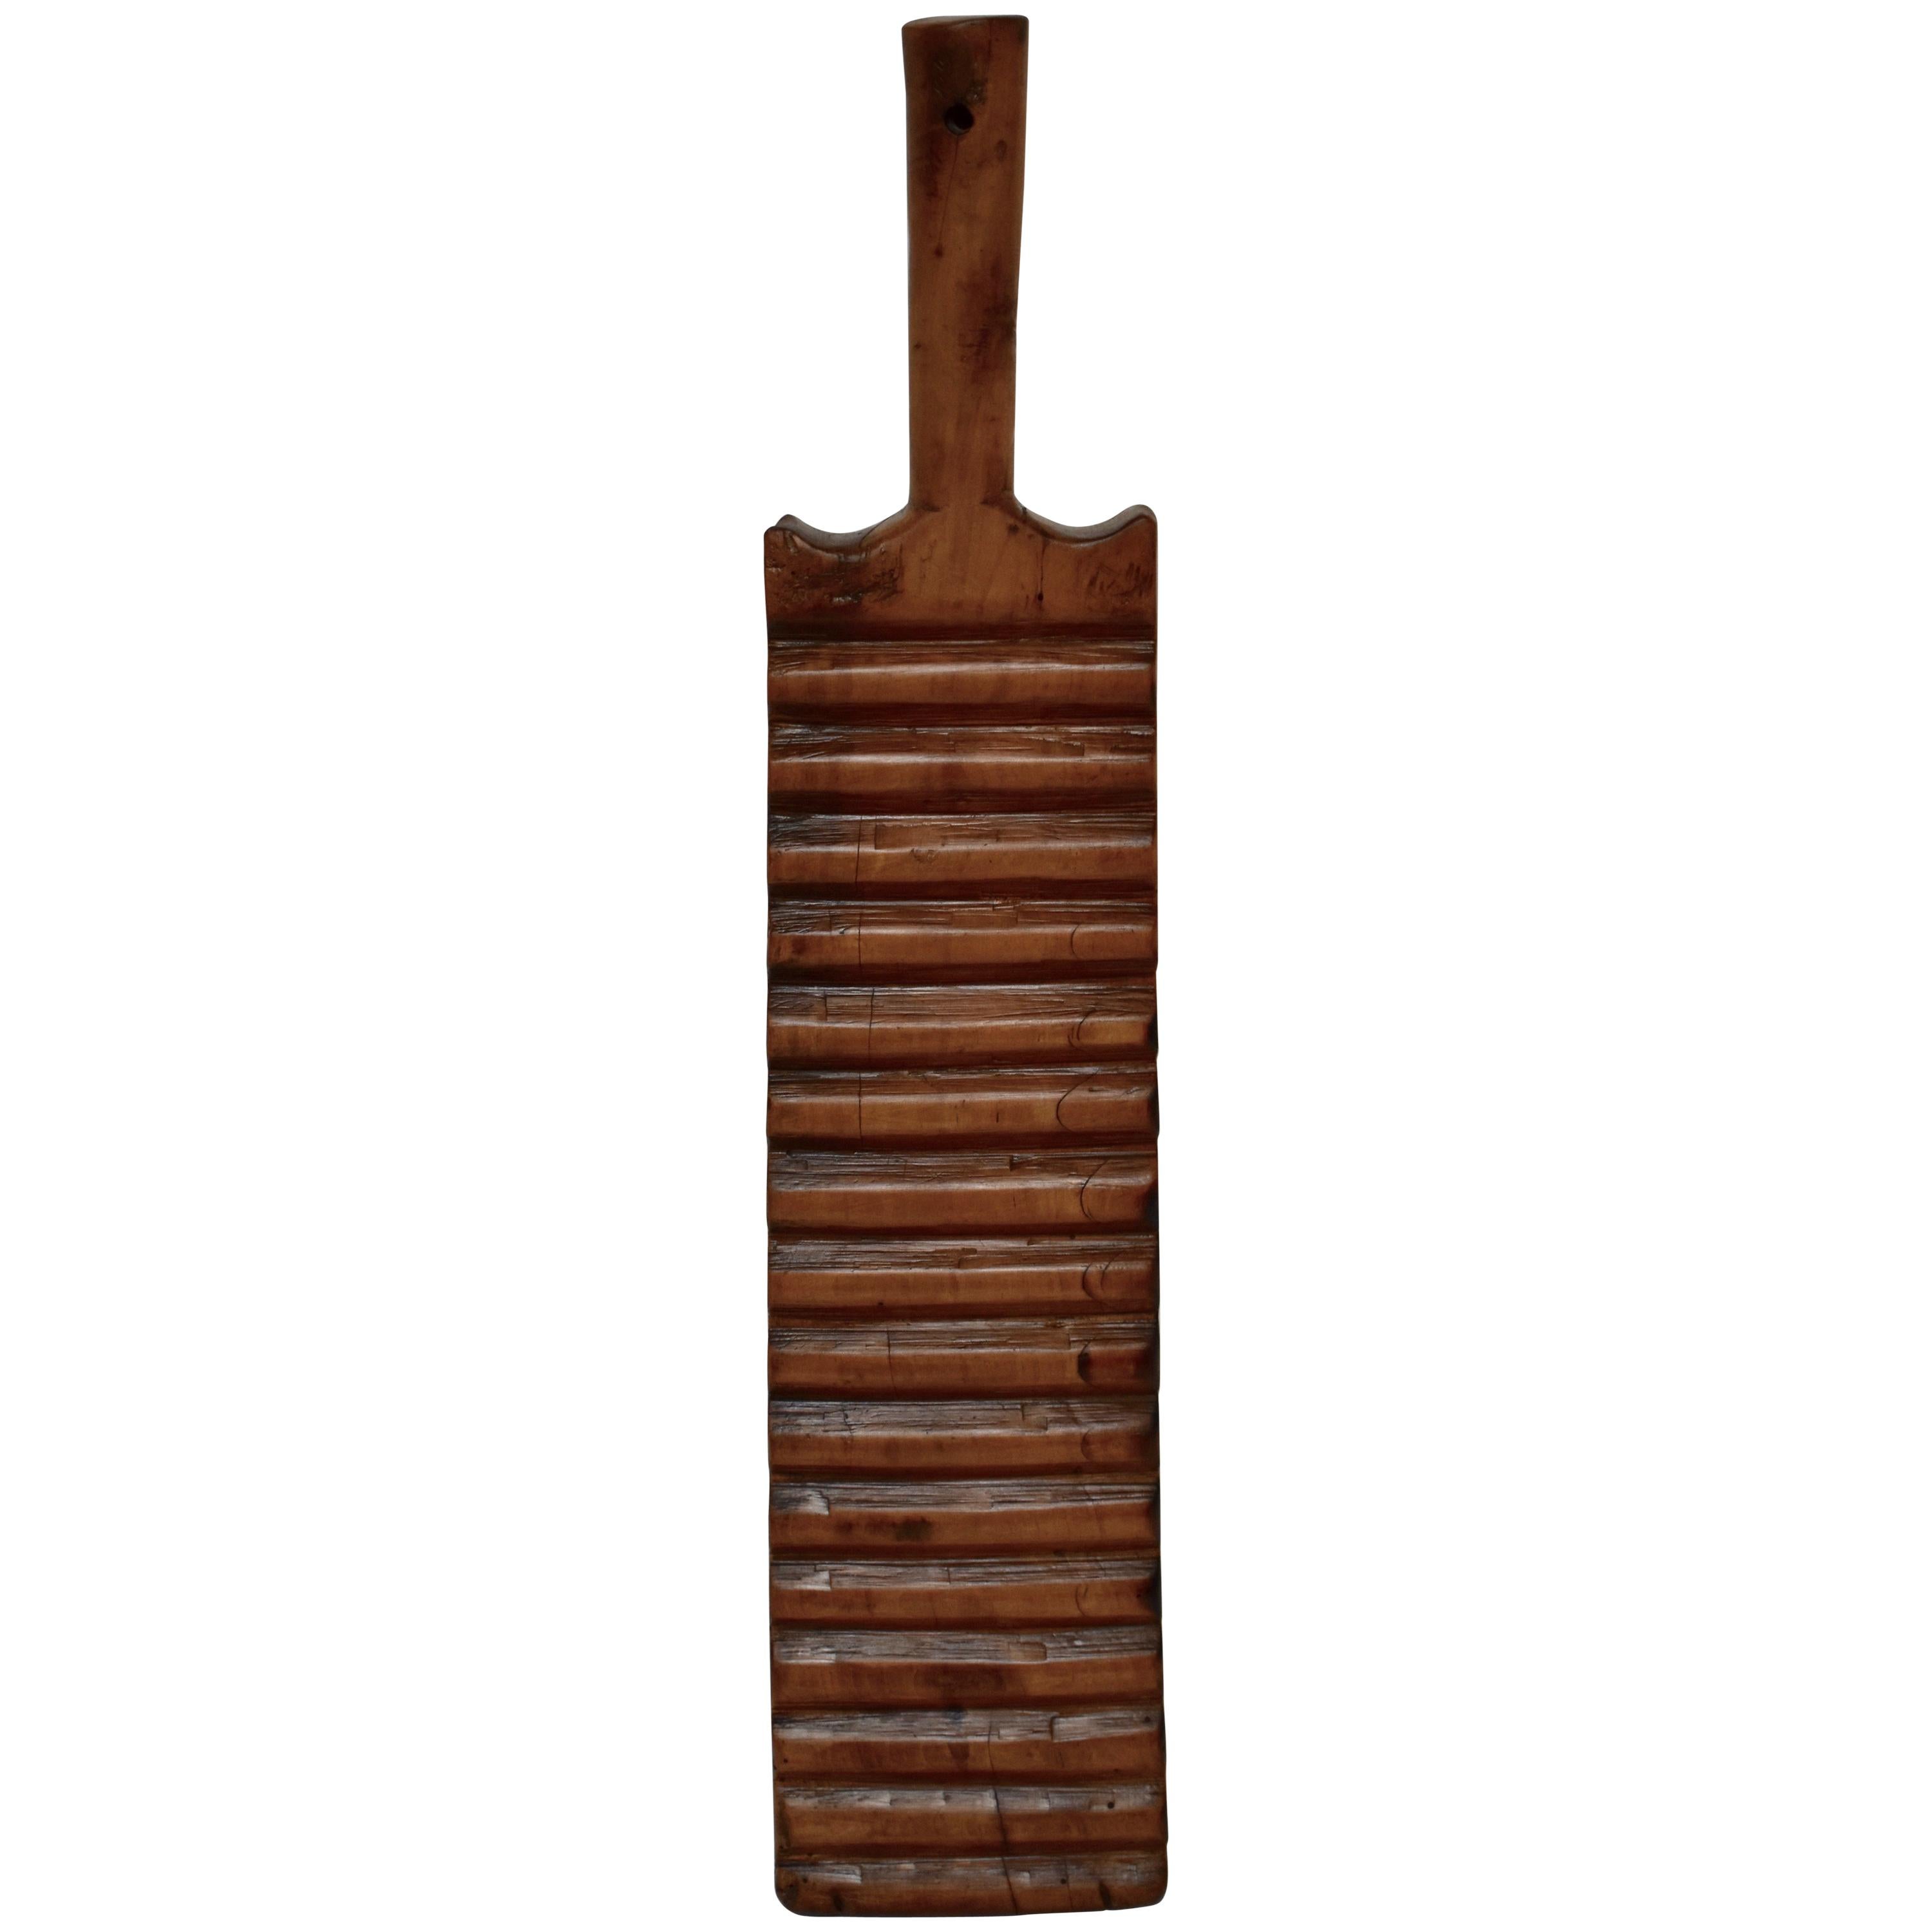 Hungarian Treen, Hand-Carved Washboard, Dated 1911